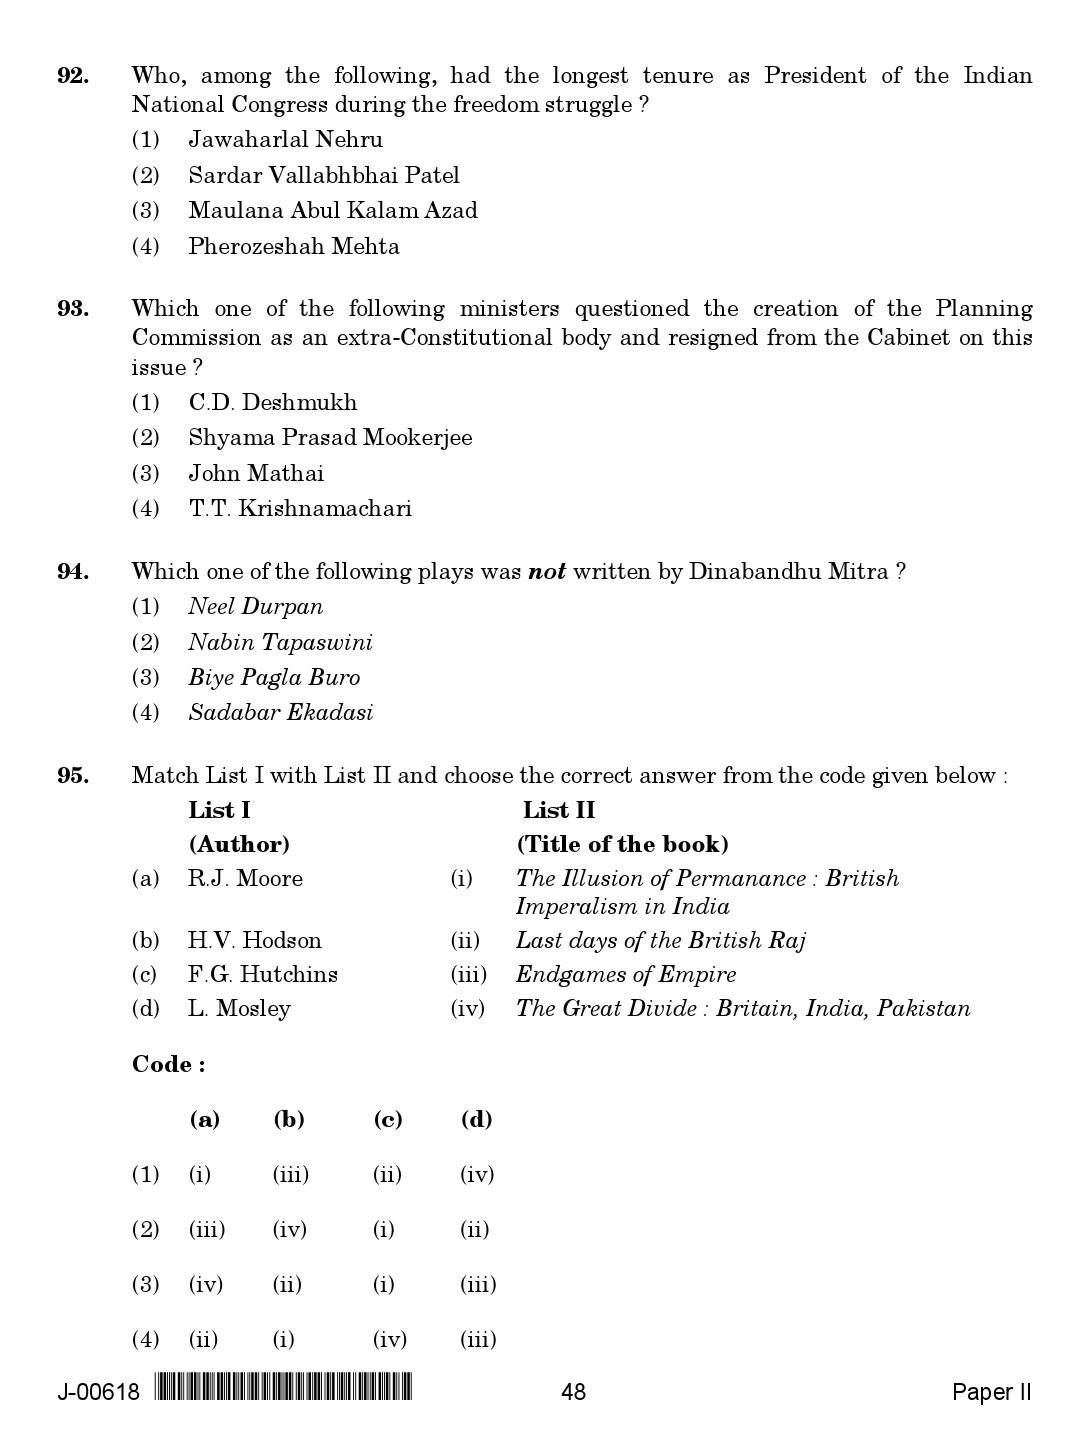 History Question Paper II July 2018 in English 2nd Exam 25